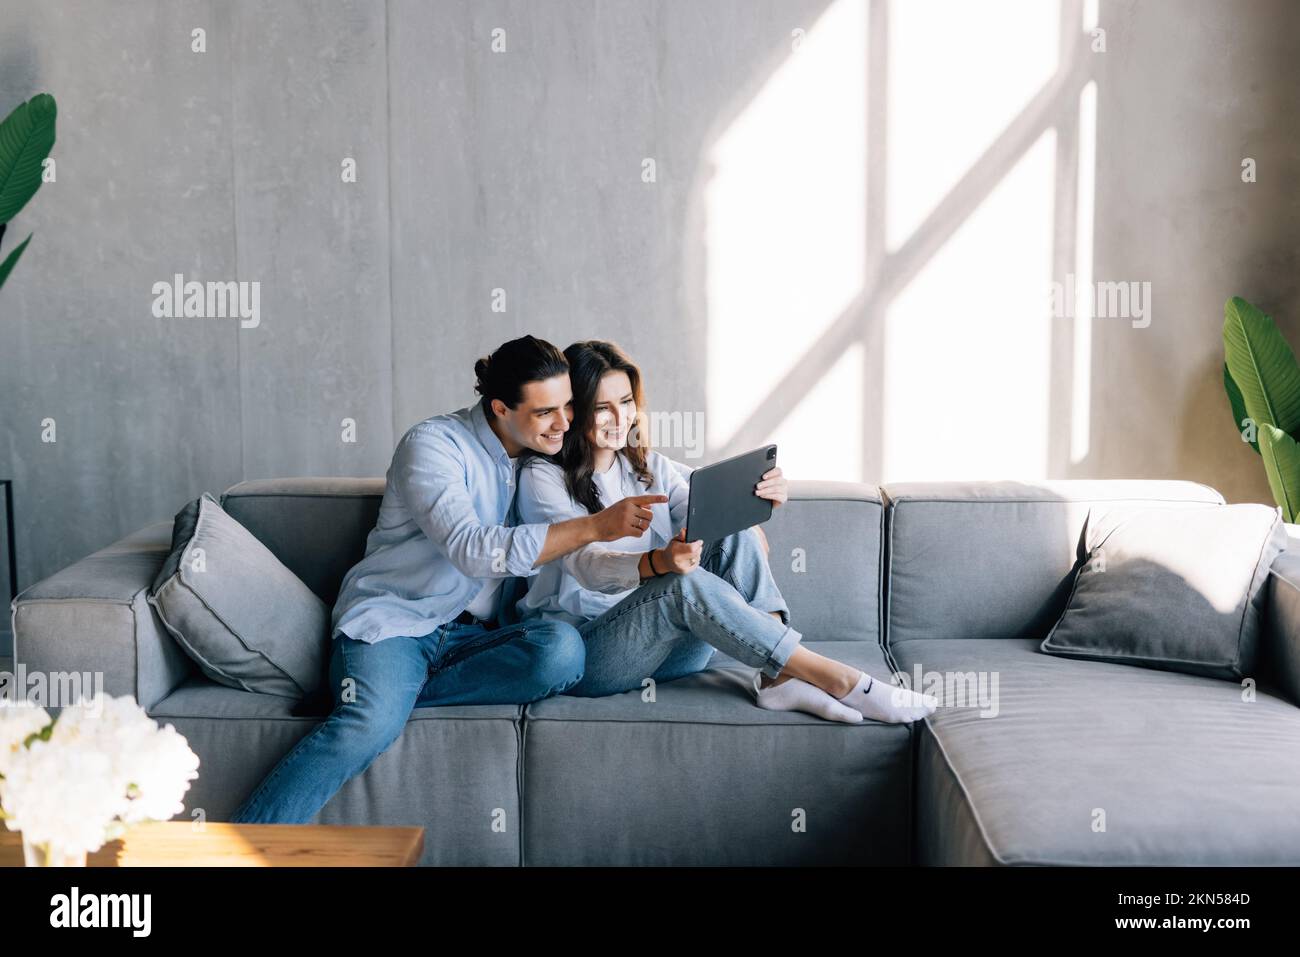 Happy young couple using computer tablet together, sitting on cozy couch at home, smiling beautiful woman and man looking at screen, surfing internet, Stock Photo